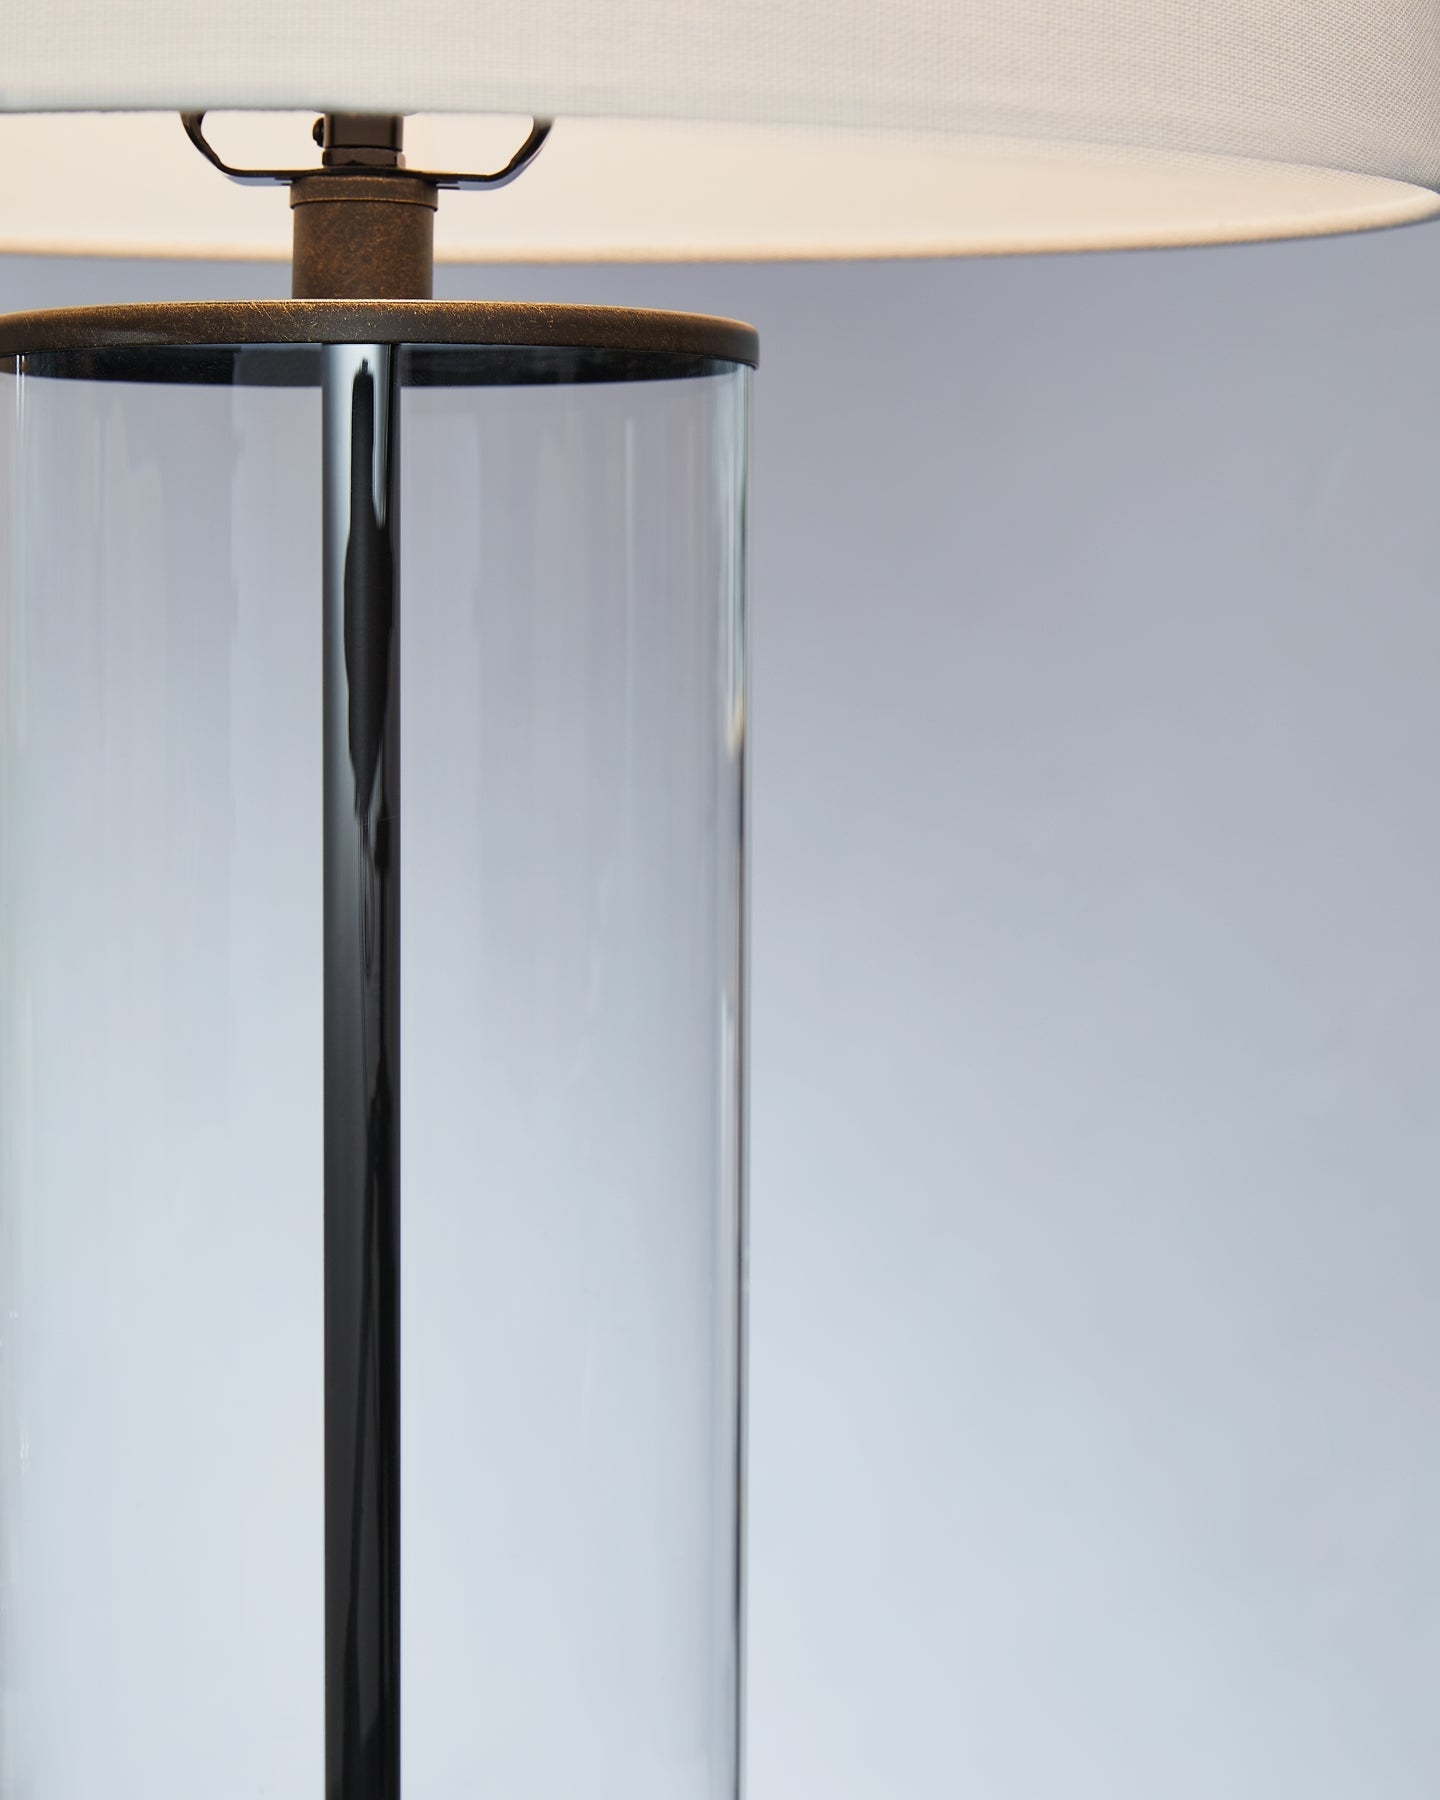 Wilmburgh Glass Table Lamp (2/CN) at Cloud 9 Mattress & Furniture furniture, home furnishing, home decor